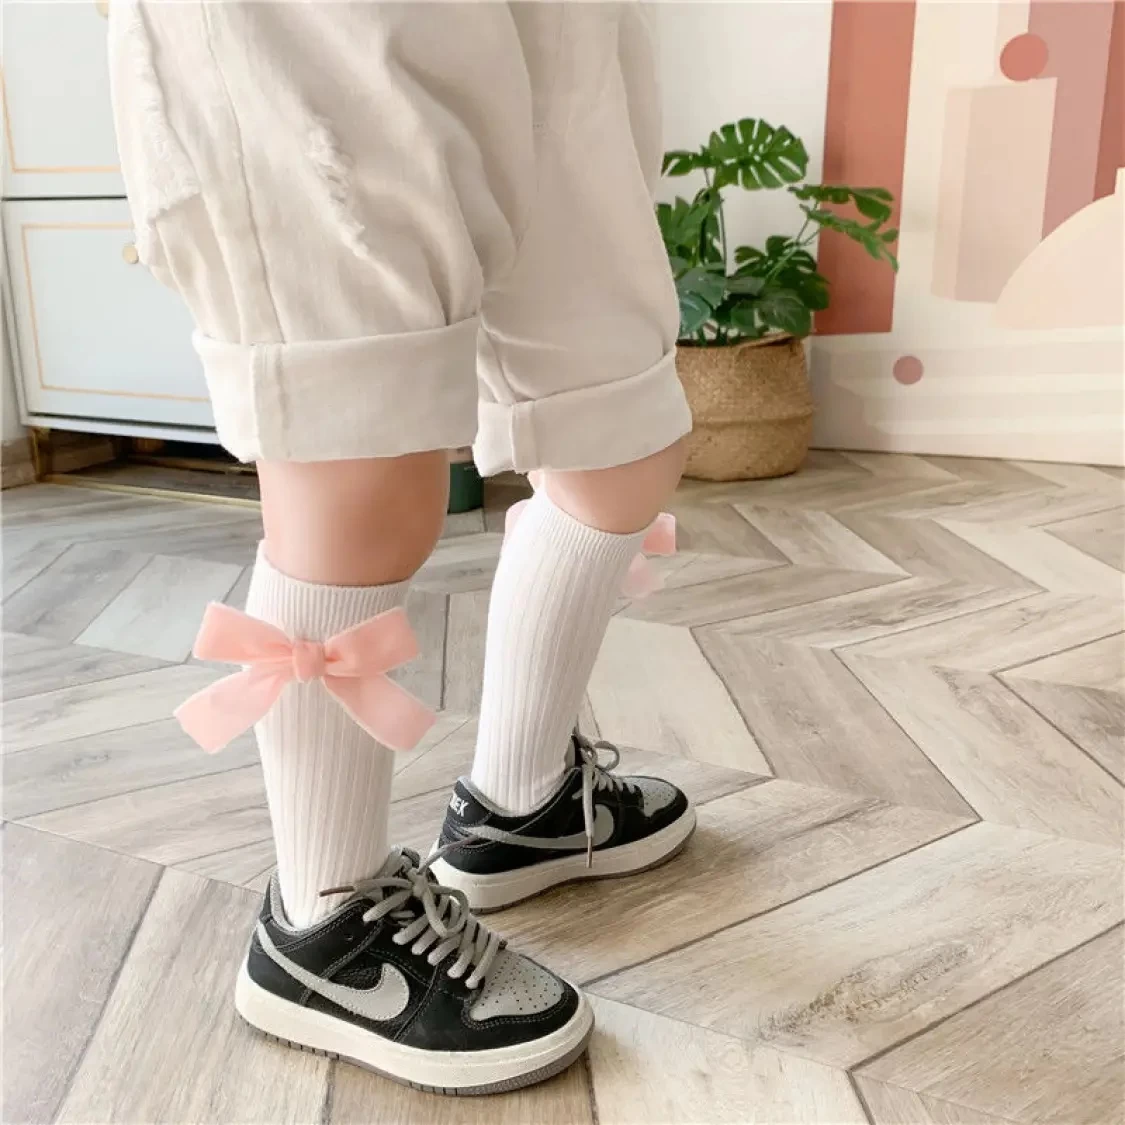 Comfortable and personalized baby socks. Welcome to your sample selection and customization